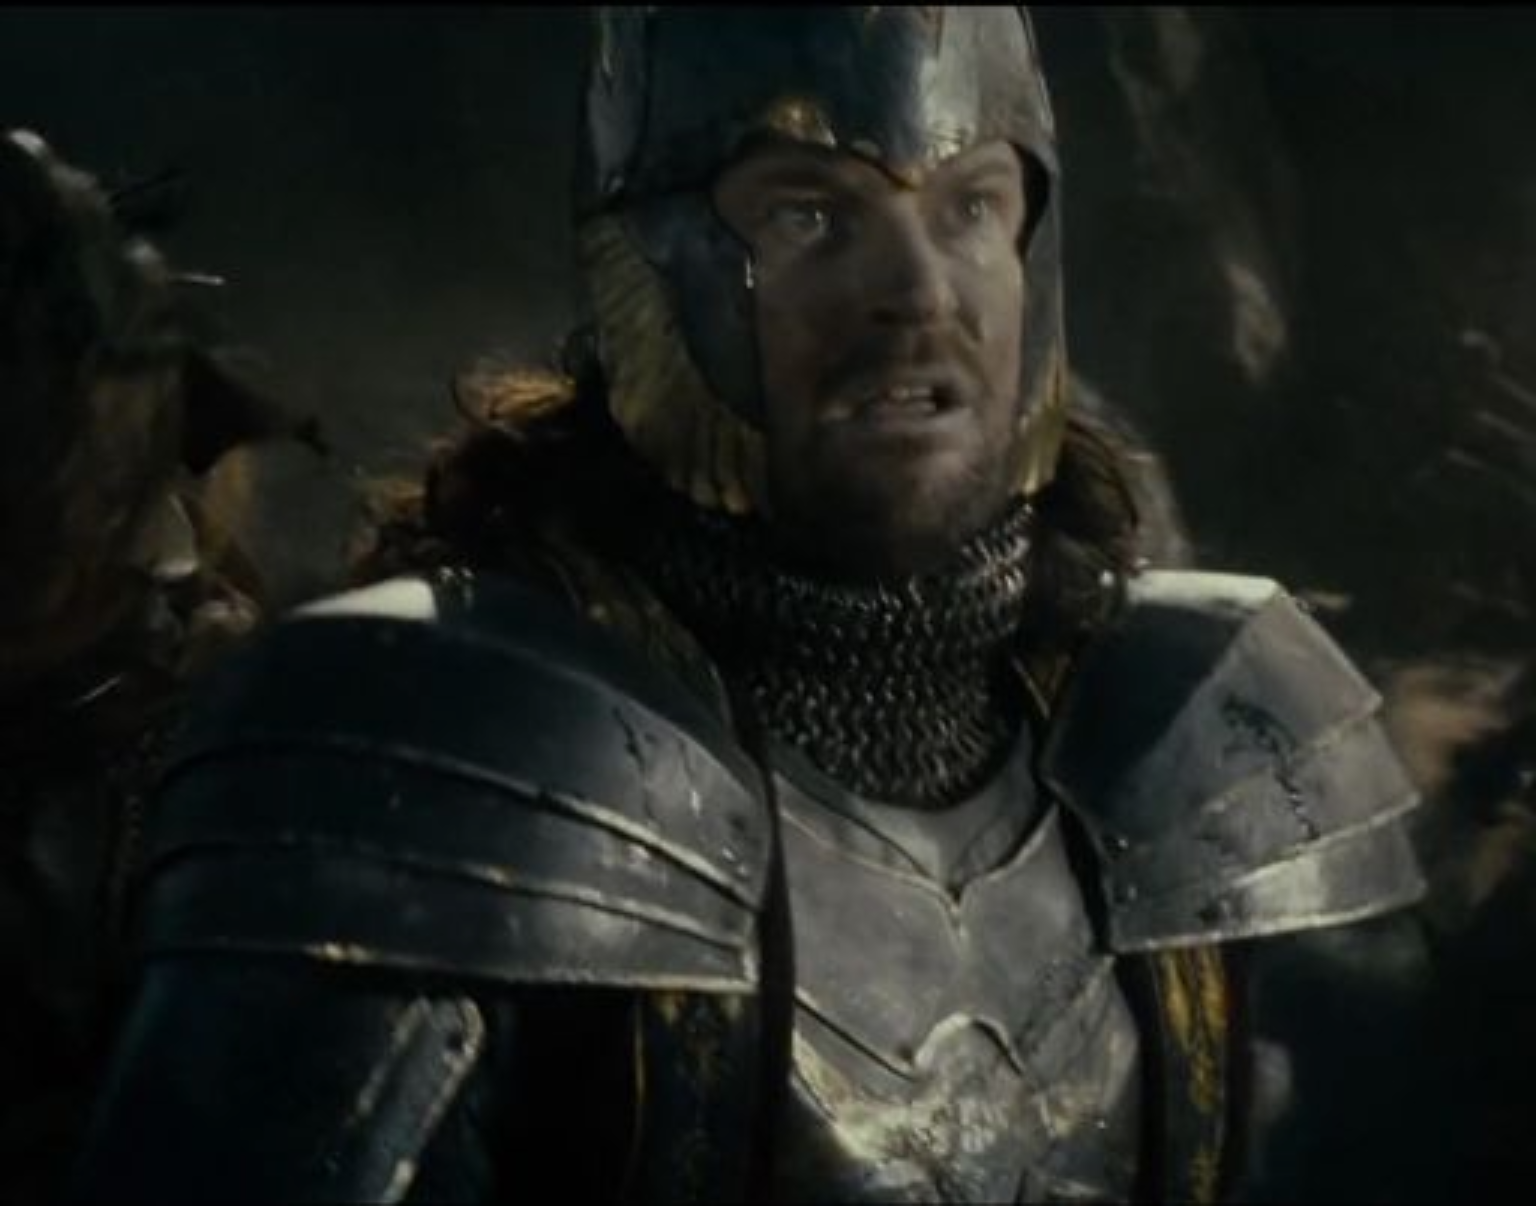 Lord Of The Rings: 5 Heroes That Act Like Villains (& 5 Heroic Villains)